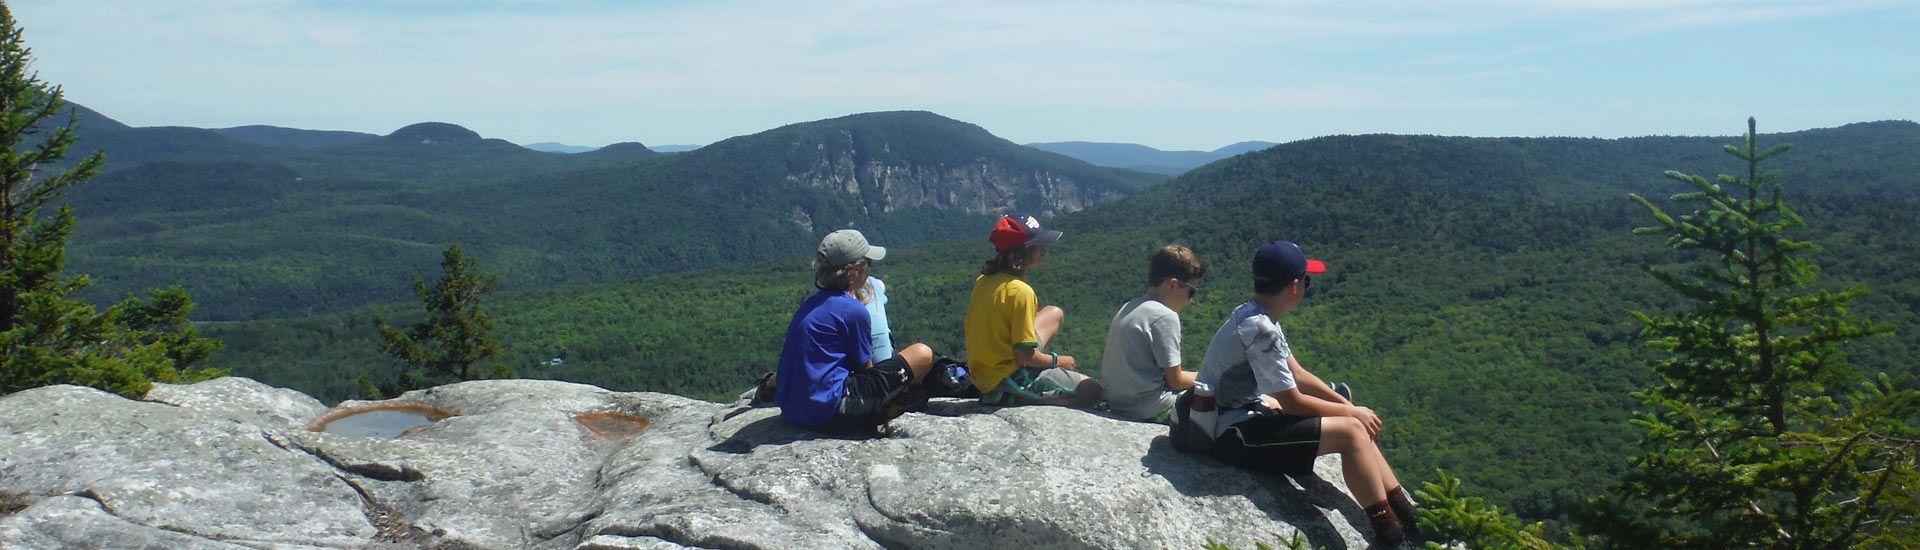 Mud City Adventures offers a multi-day camp for kids to explore their own back yards - Vermont! We take the kids on 3 days of paddling, hiking, and biking adventures, exploring the Northeast Kingdom of Vermont.